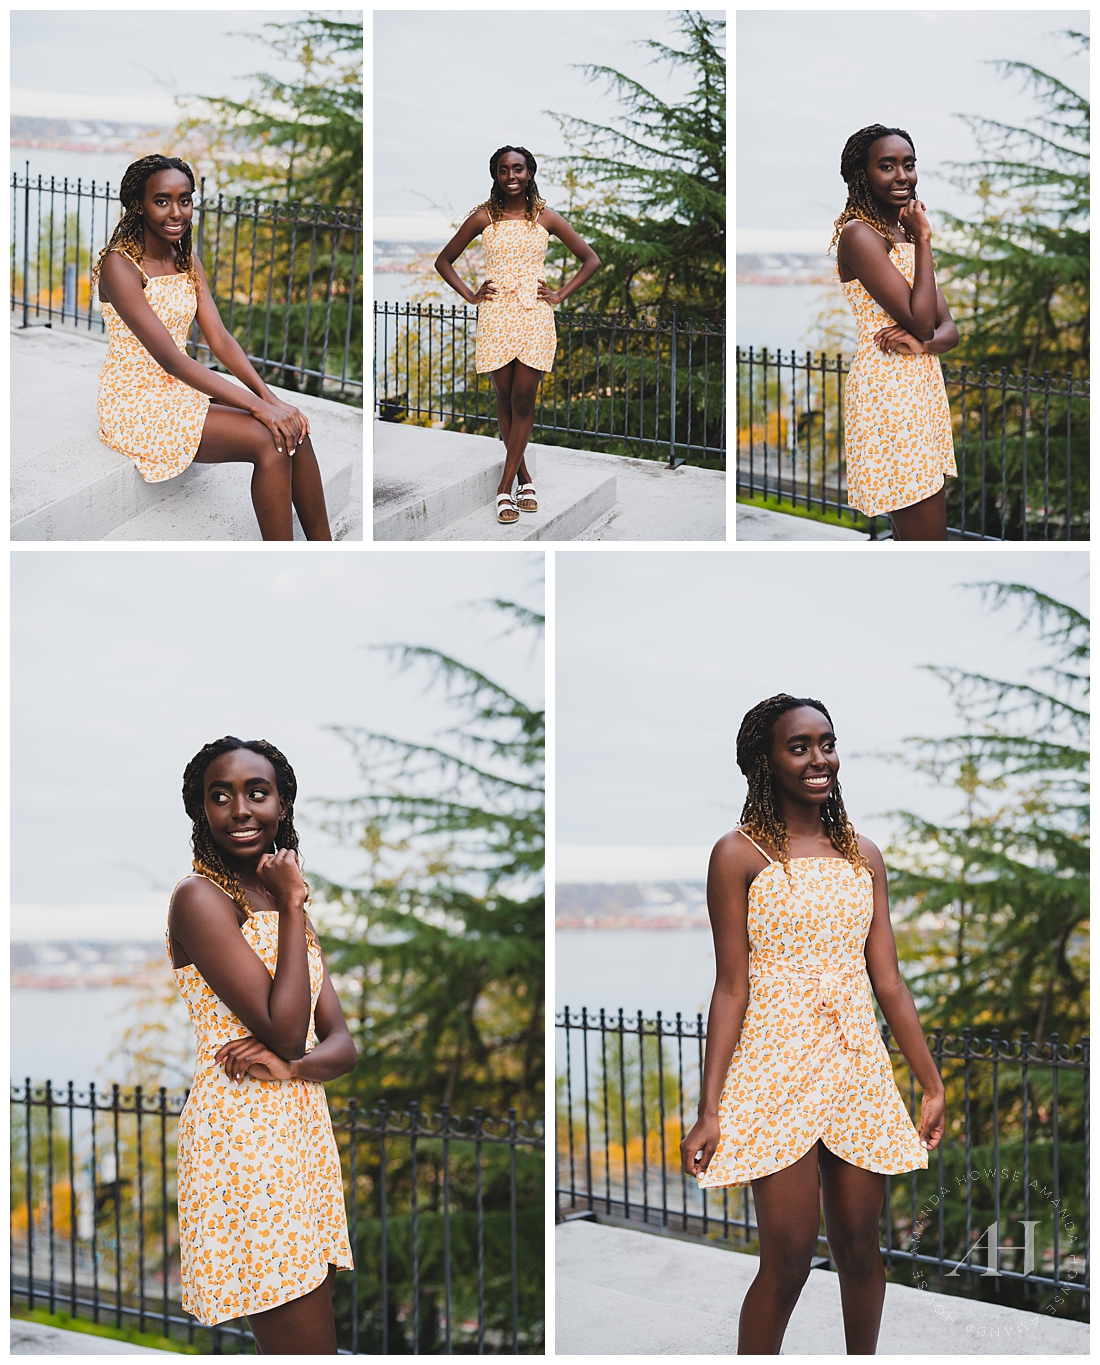  Colorful Senior Portraits in Fall | Bright Yellow Dress with Floral Print and Birks | Photographed by the Best Tacoma Washington Senior Photographer Amanda Howse Photography